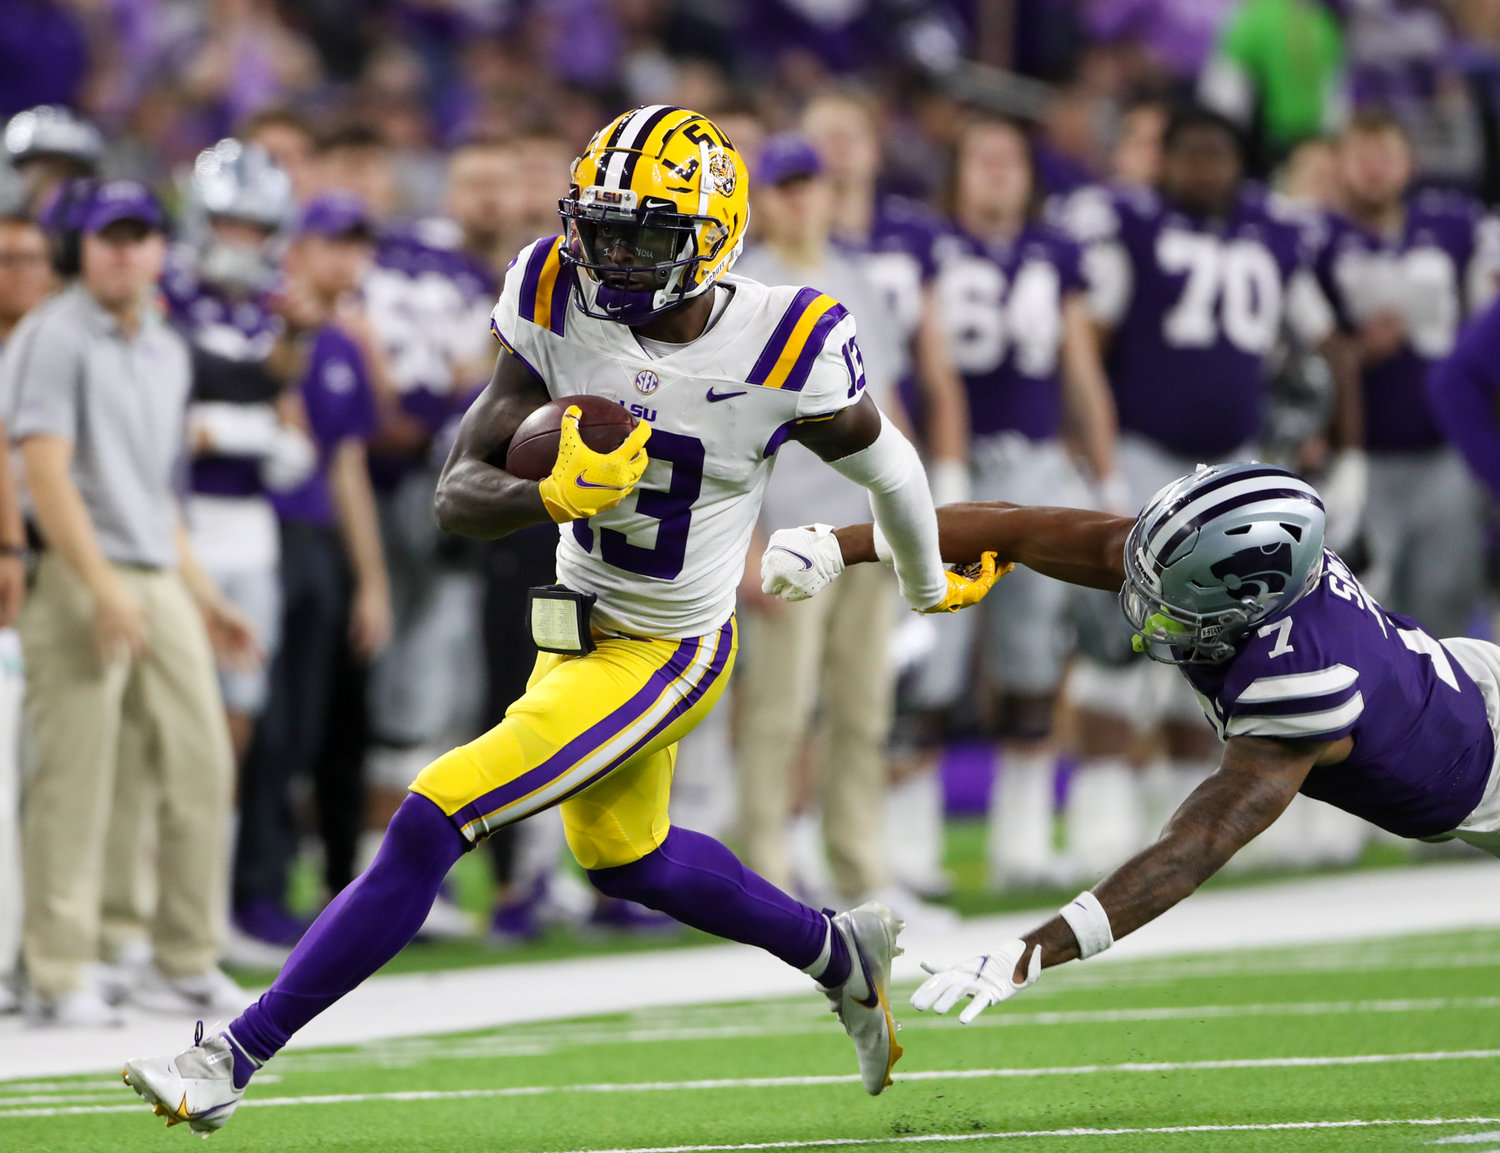 LSU Tigers quarterback Jontre Kirklin (13) escapes the grasp of Kansas State Wildcats defensive back TJ Smith (7) on a first-down carry during the first half of the TaxAct Texas Bowl on Jan. 4, 2022 in Houston, Texas.